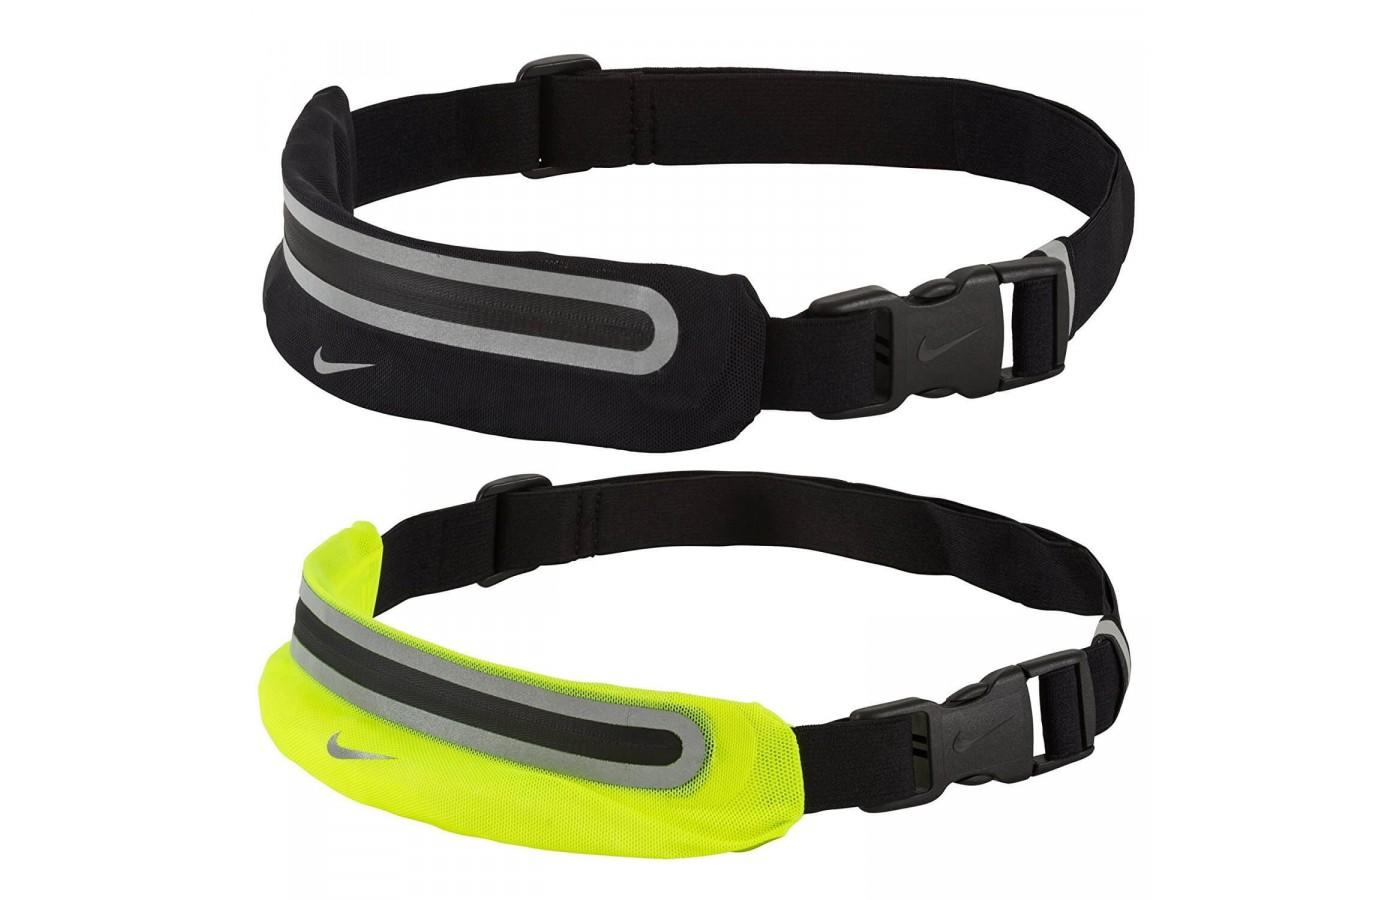 The Nike Lean Waist Pack is easy to put on and adjust